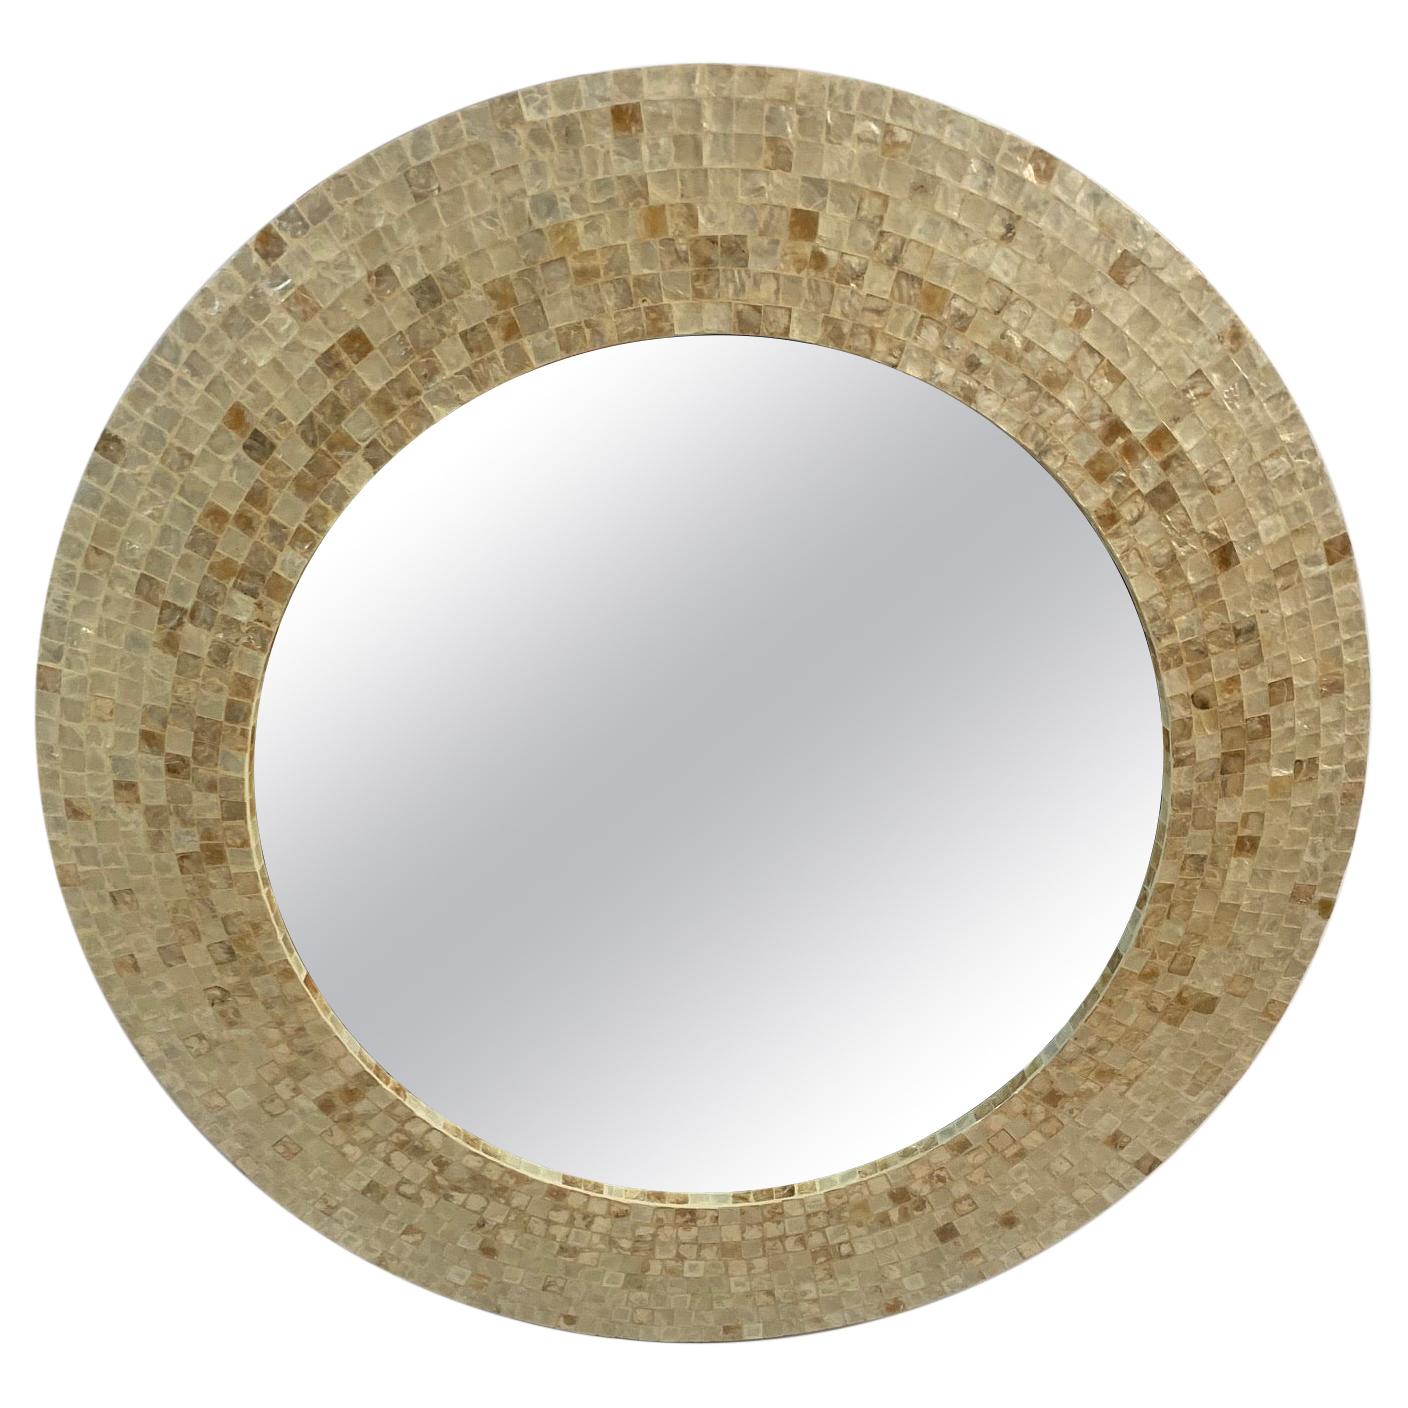 Glamorous Maitland Smith Mother of Pearl Mosaic Round Mirror